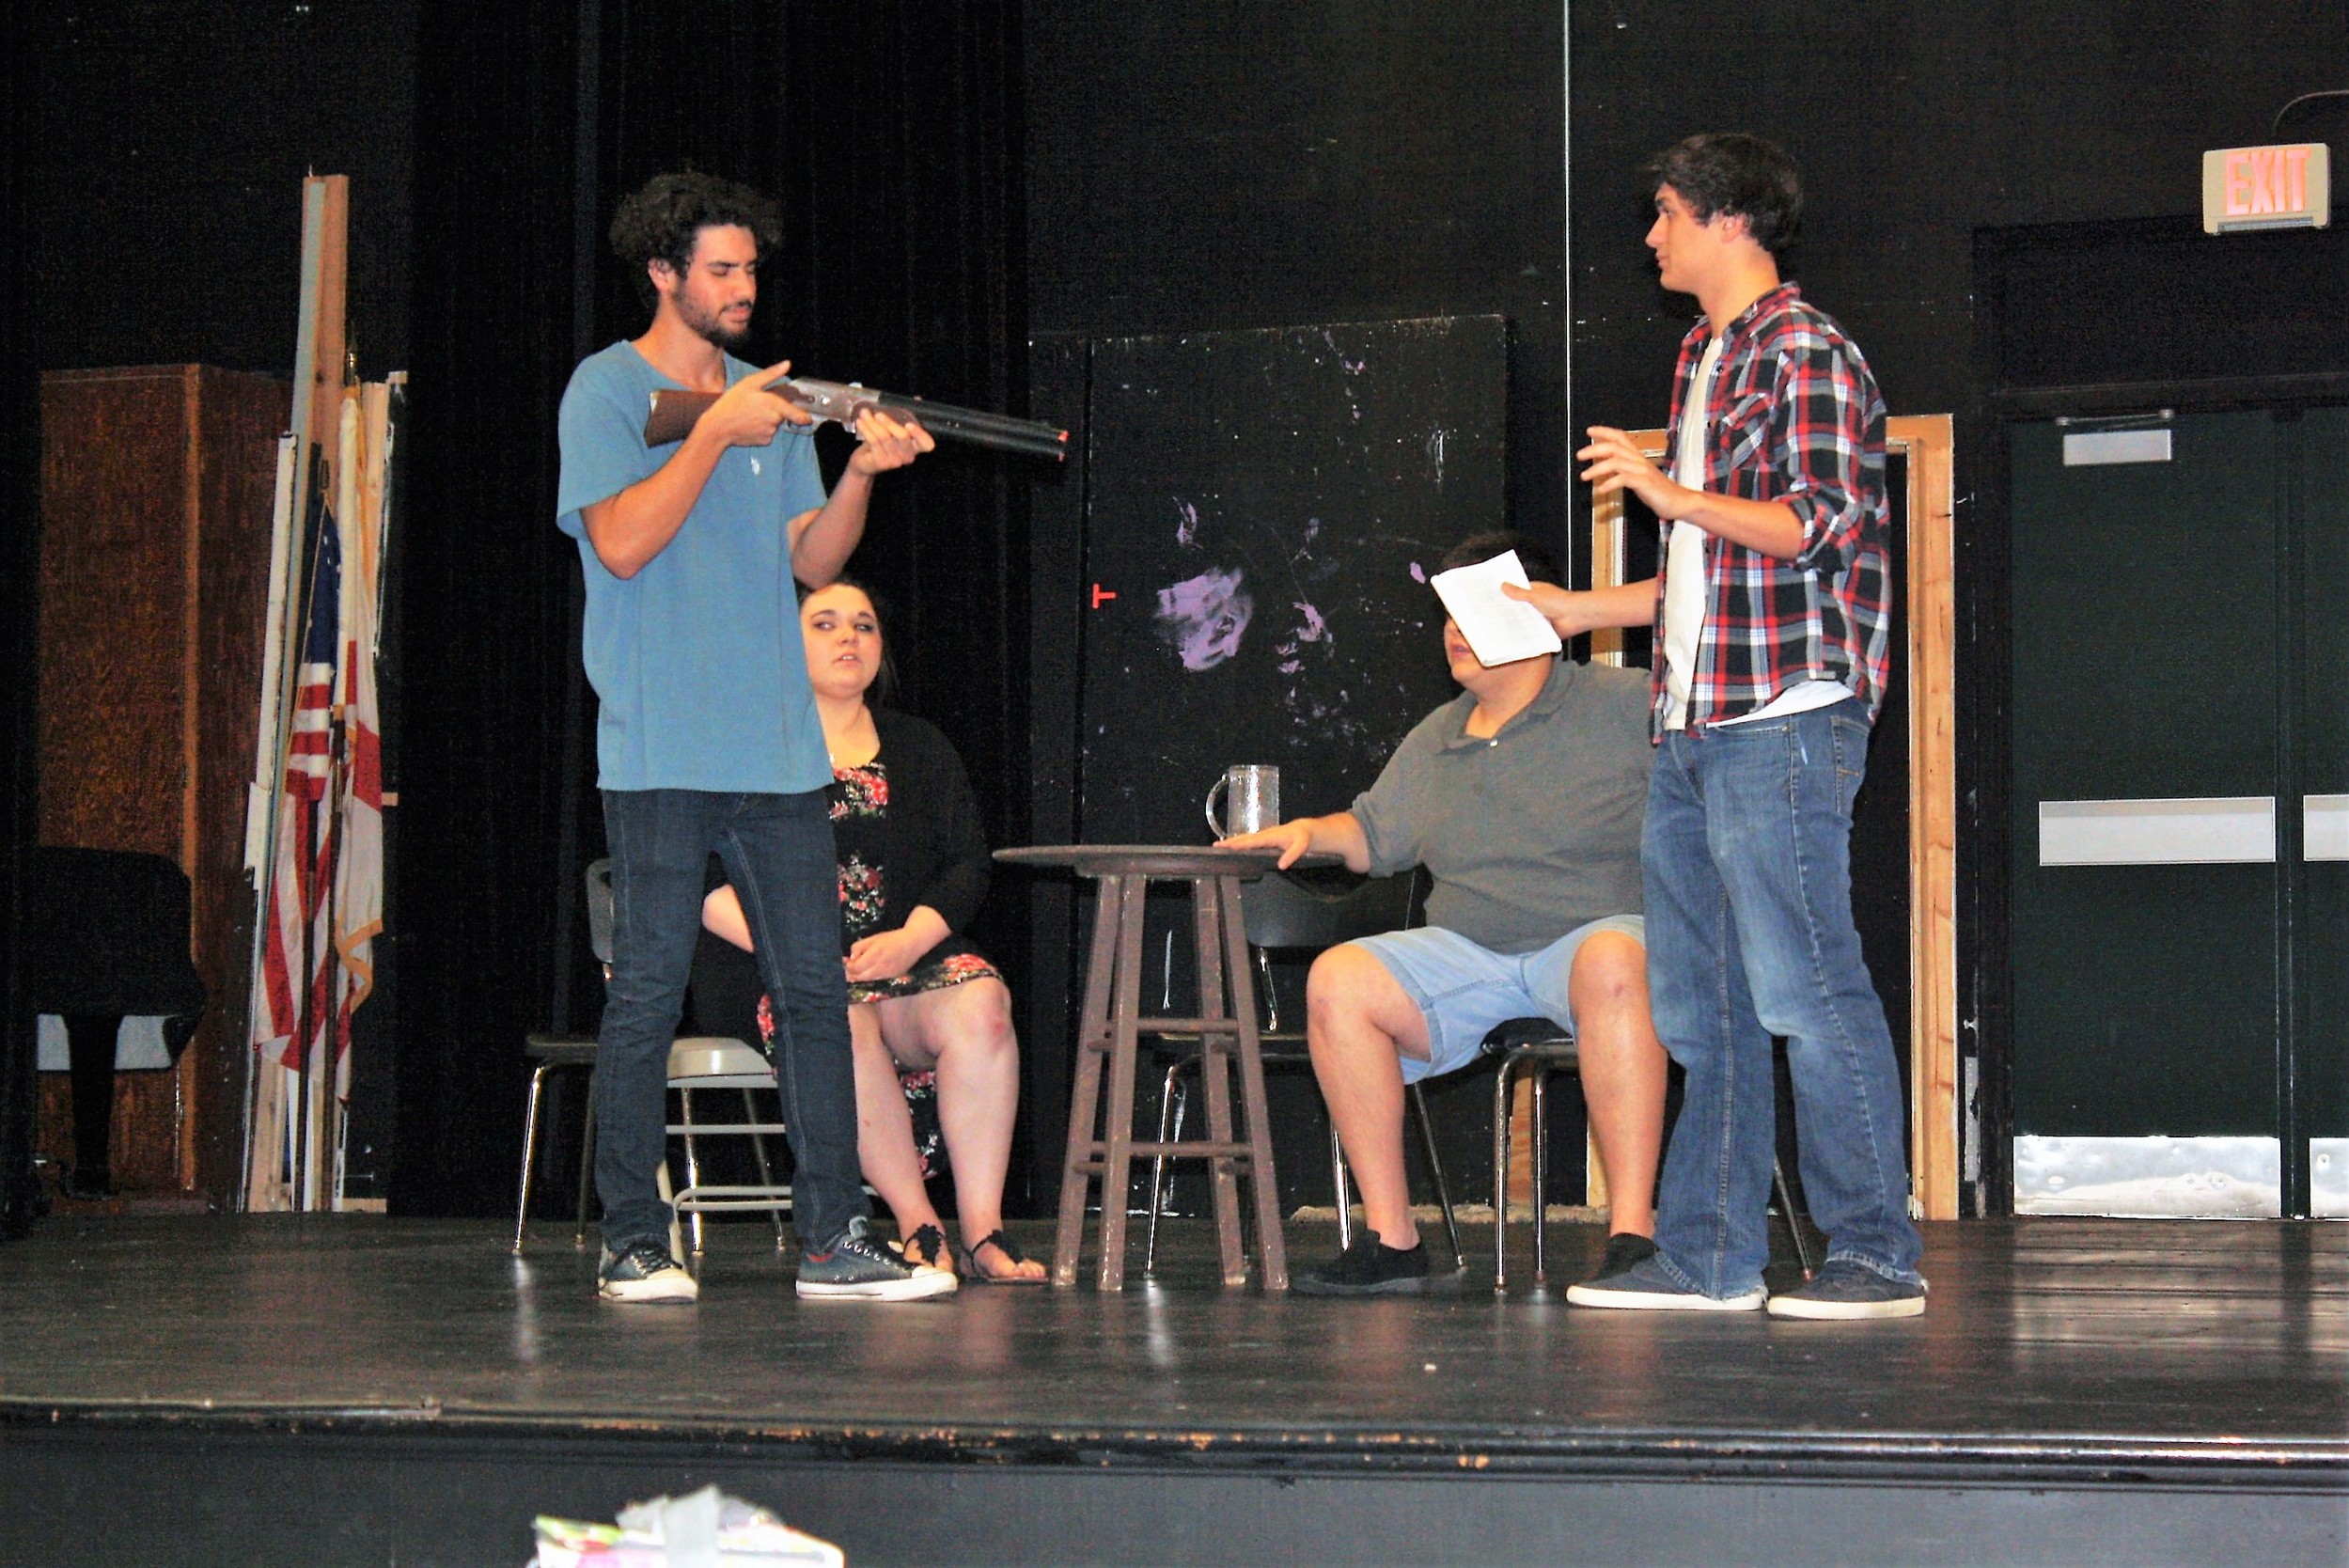 Nease drama students rehearse for the upcoming production of The Crucible. Standing: Sebastian Conte and Grant Burmeister. Seated: Brianna Sprague-Triplett and Jacob Alward.